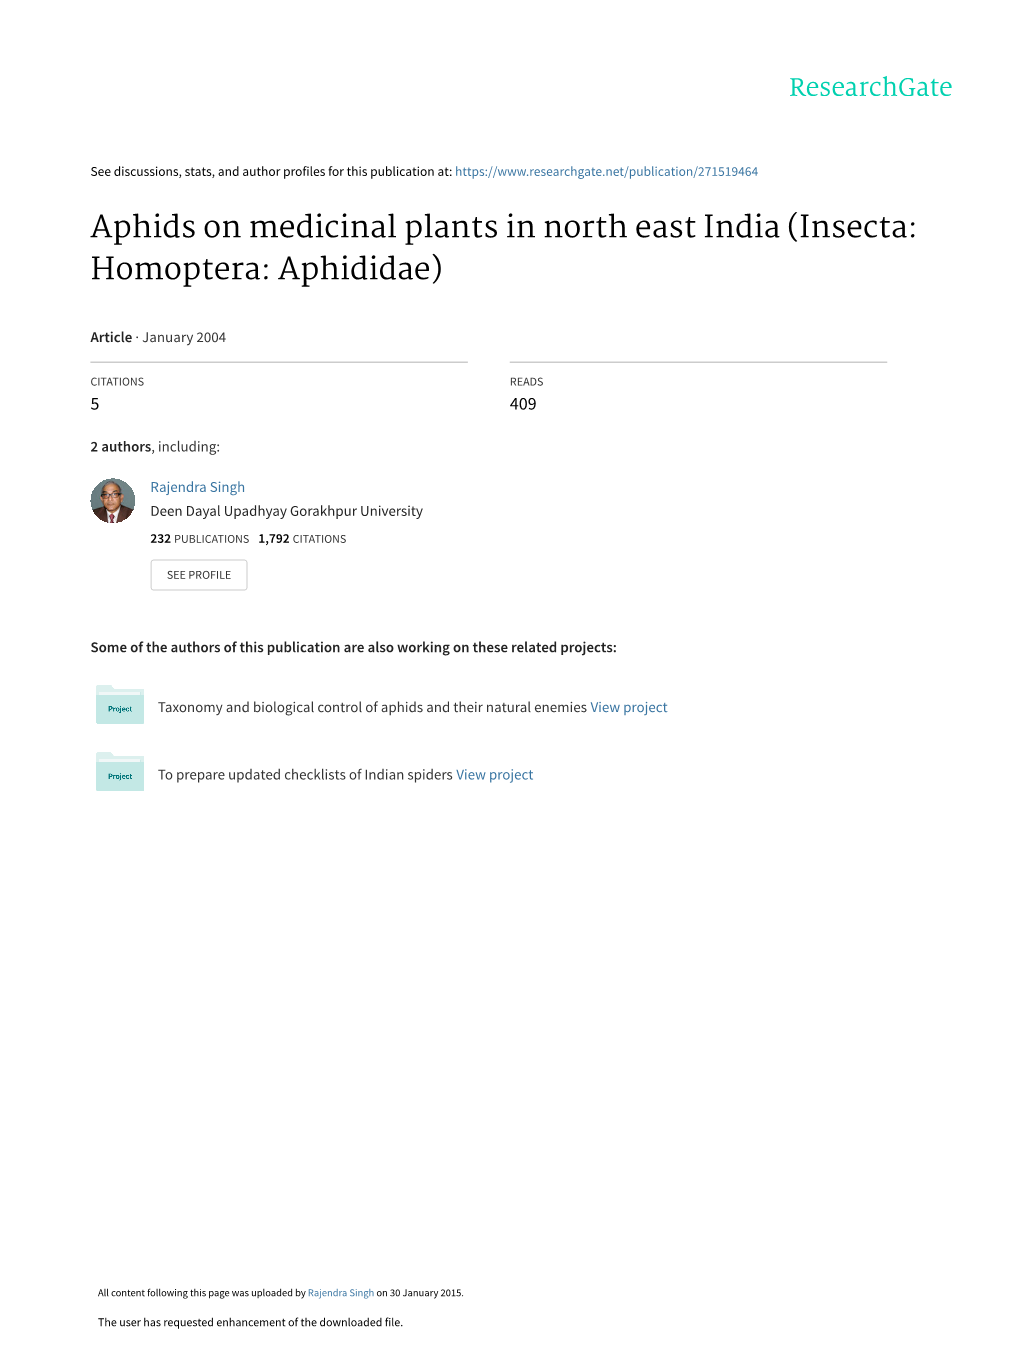 Aphids on Medicinal Plants in North East India (Insecta: Homoptera: Aphididae)